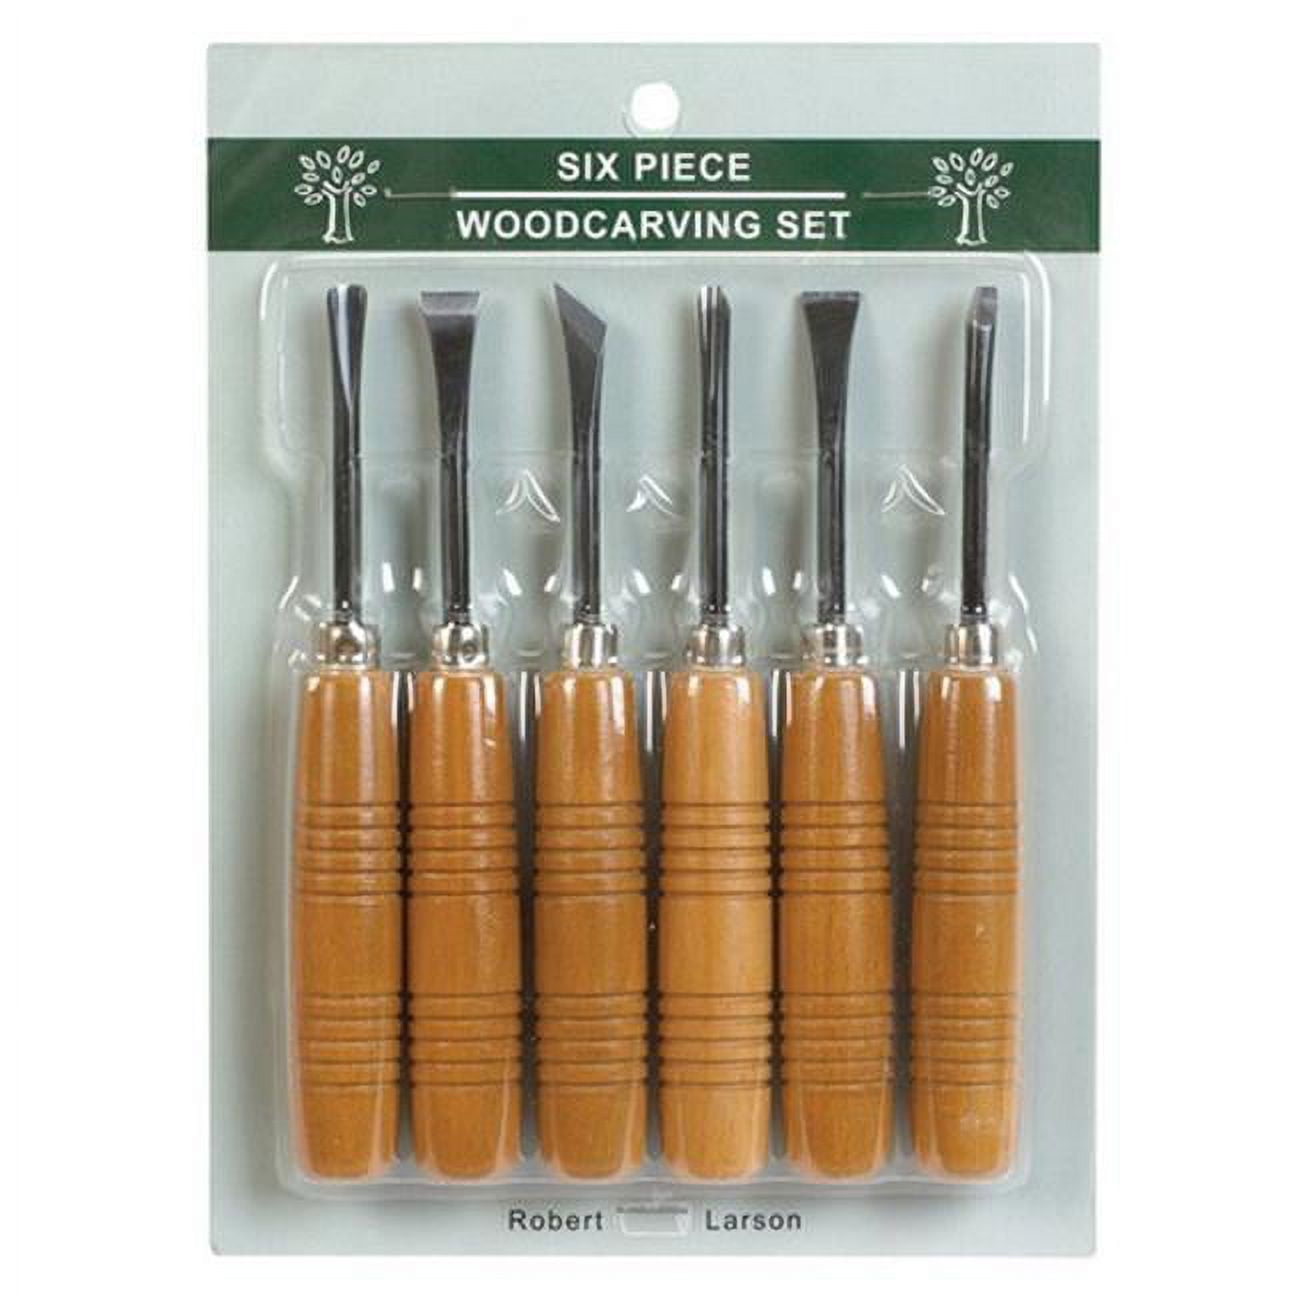  6Pcs Wood Carving Chisel Kit, DIY Sculpting Tools Professional  Sharp Hand Gouges Woodworking Knife Woodcarving Set Gift for Professional  Beginners Hobbyists Artistic Father Day Carpenter DIY Sculpture : Arts,  Crafts 